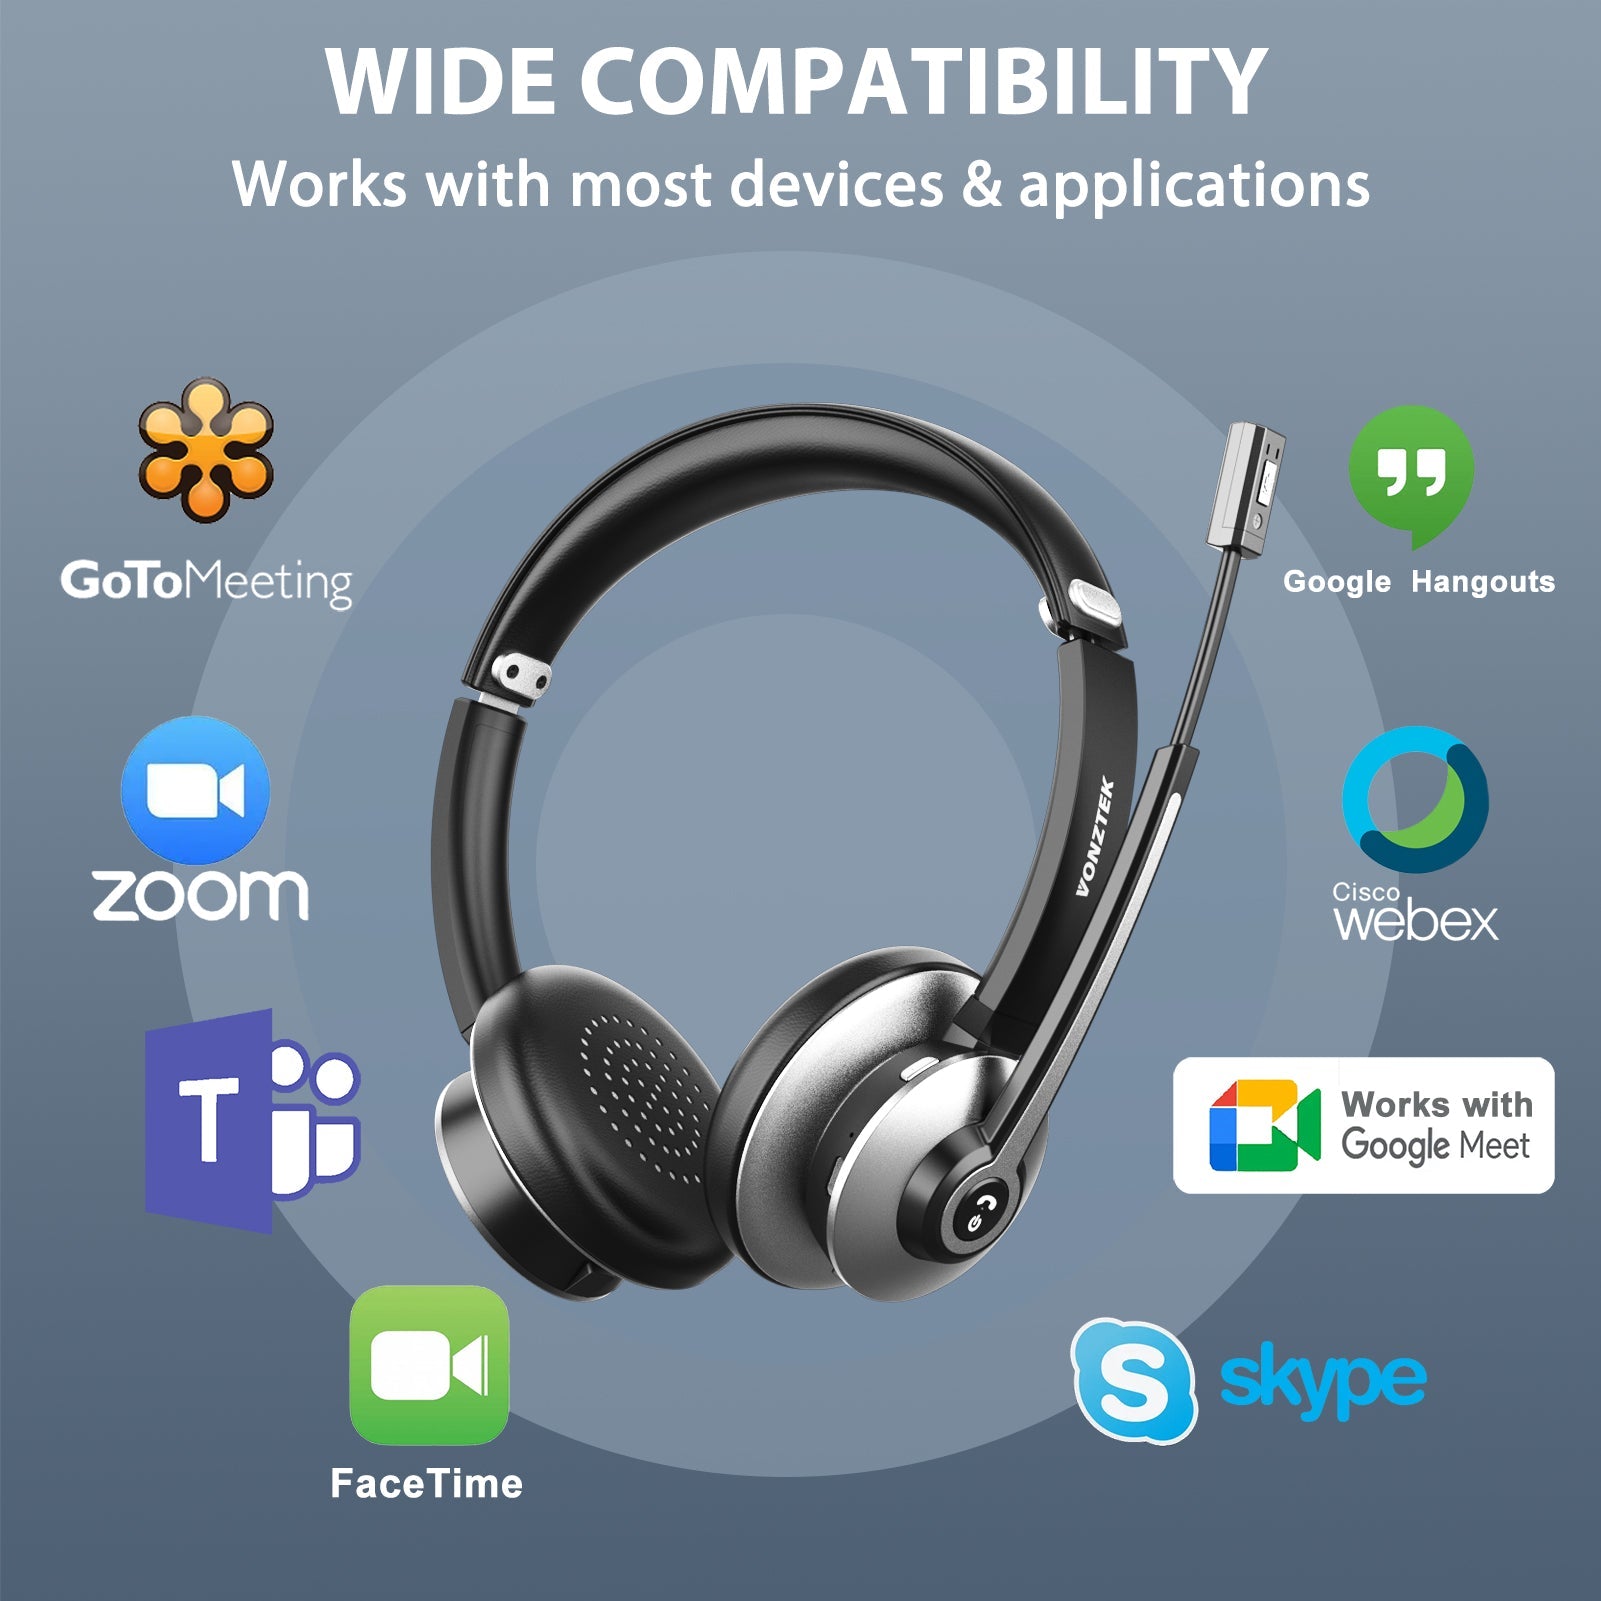 Wide compatibility,Works with most devices & applications,Gotomeeting,Zoom,Facetime,Skype,Google hangouts,Webex,Works with google meet.